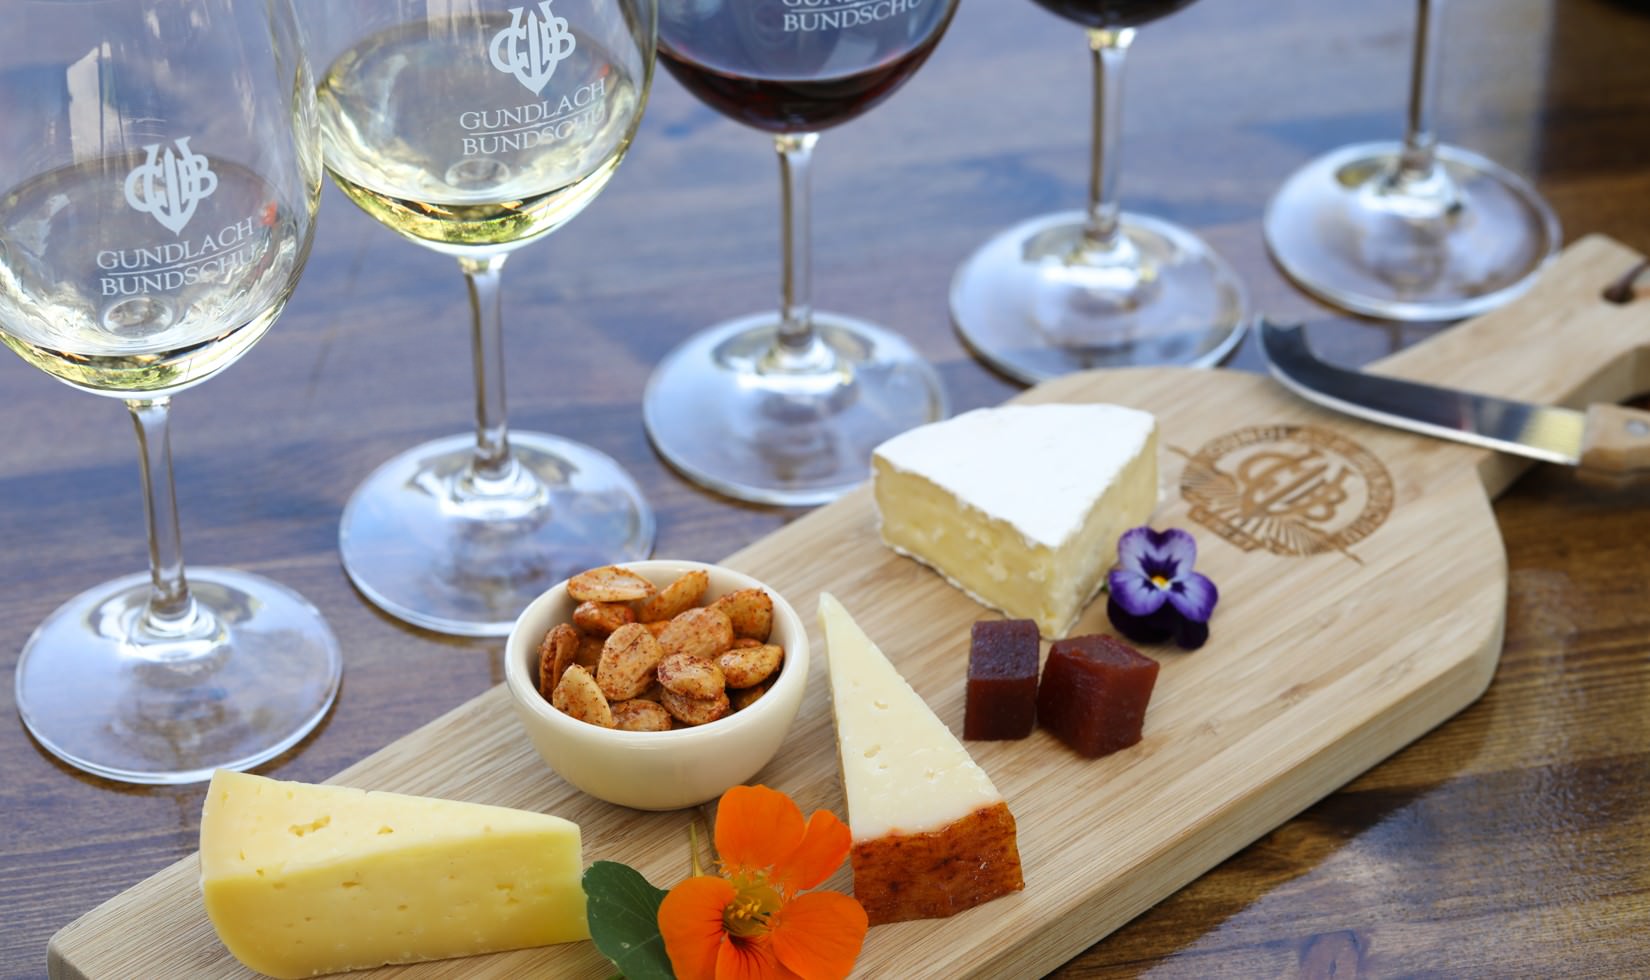 A cheese and wine tasting in Sonoma Valley at Gundlach Bundschu Winery